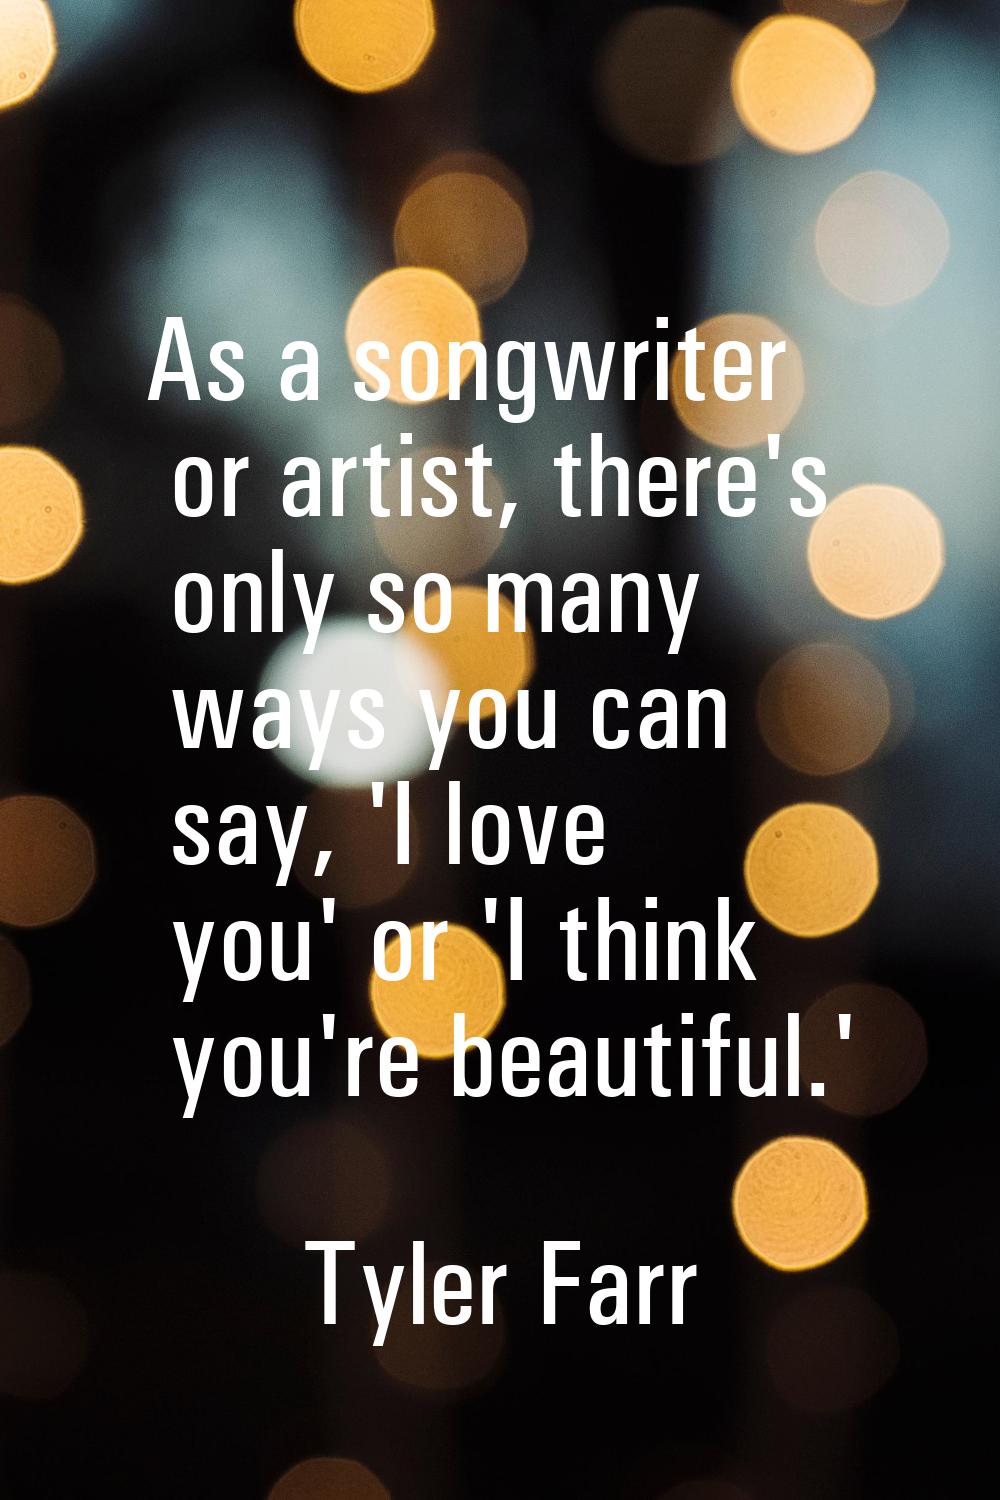 As a songwriter or artist, there's only so many ways you can say, 'I love you' or 'I think you're b